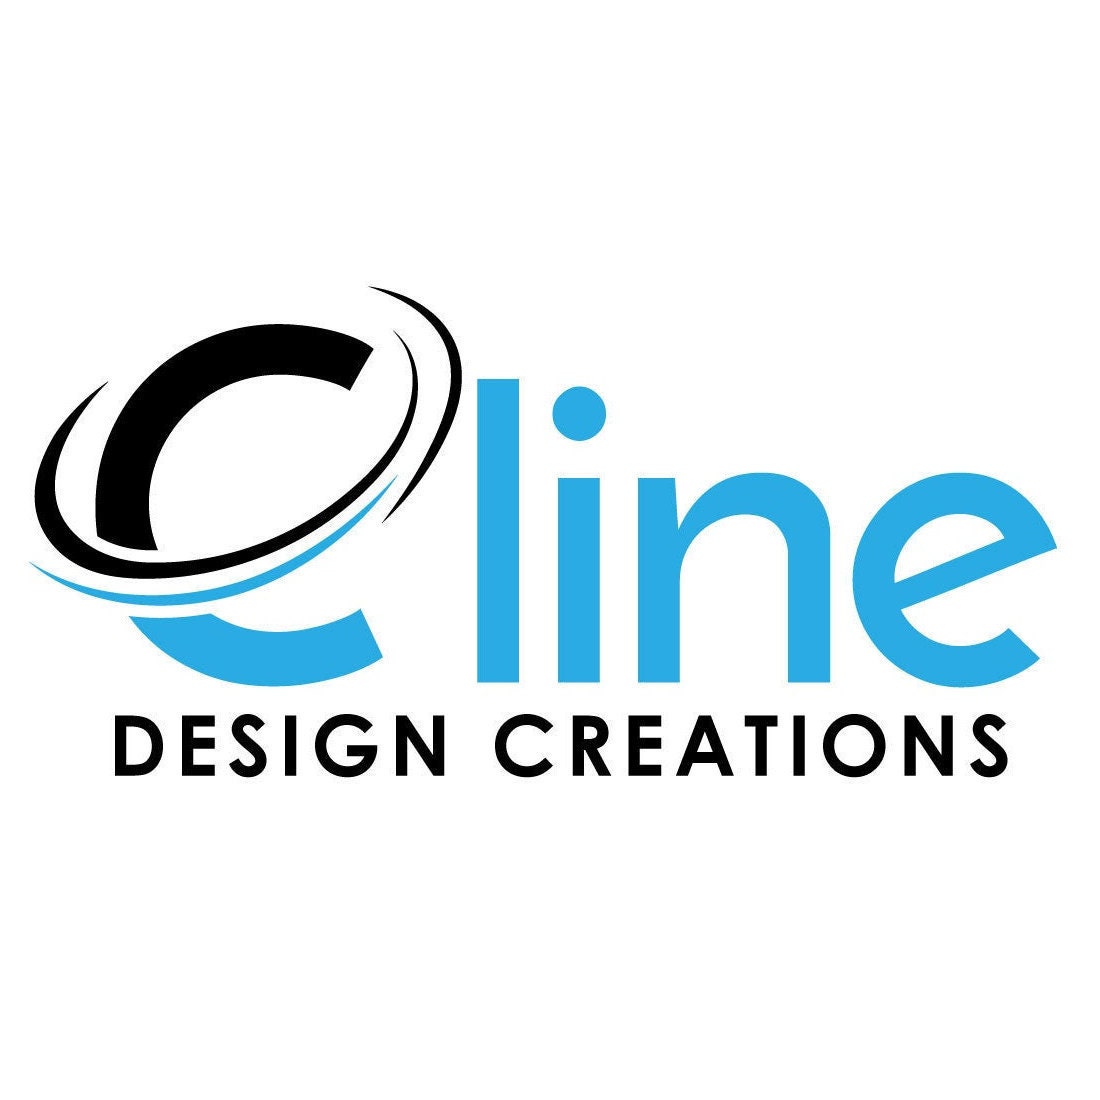 ClineDesignCreations - Etsy